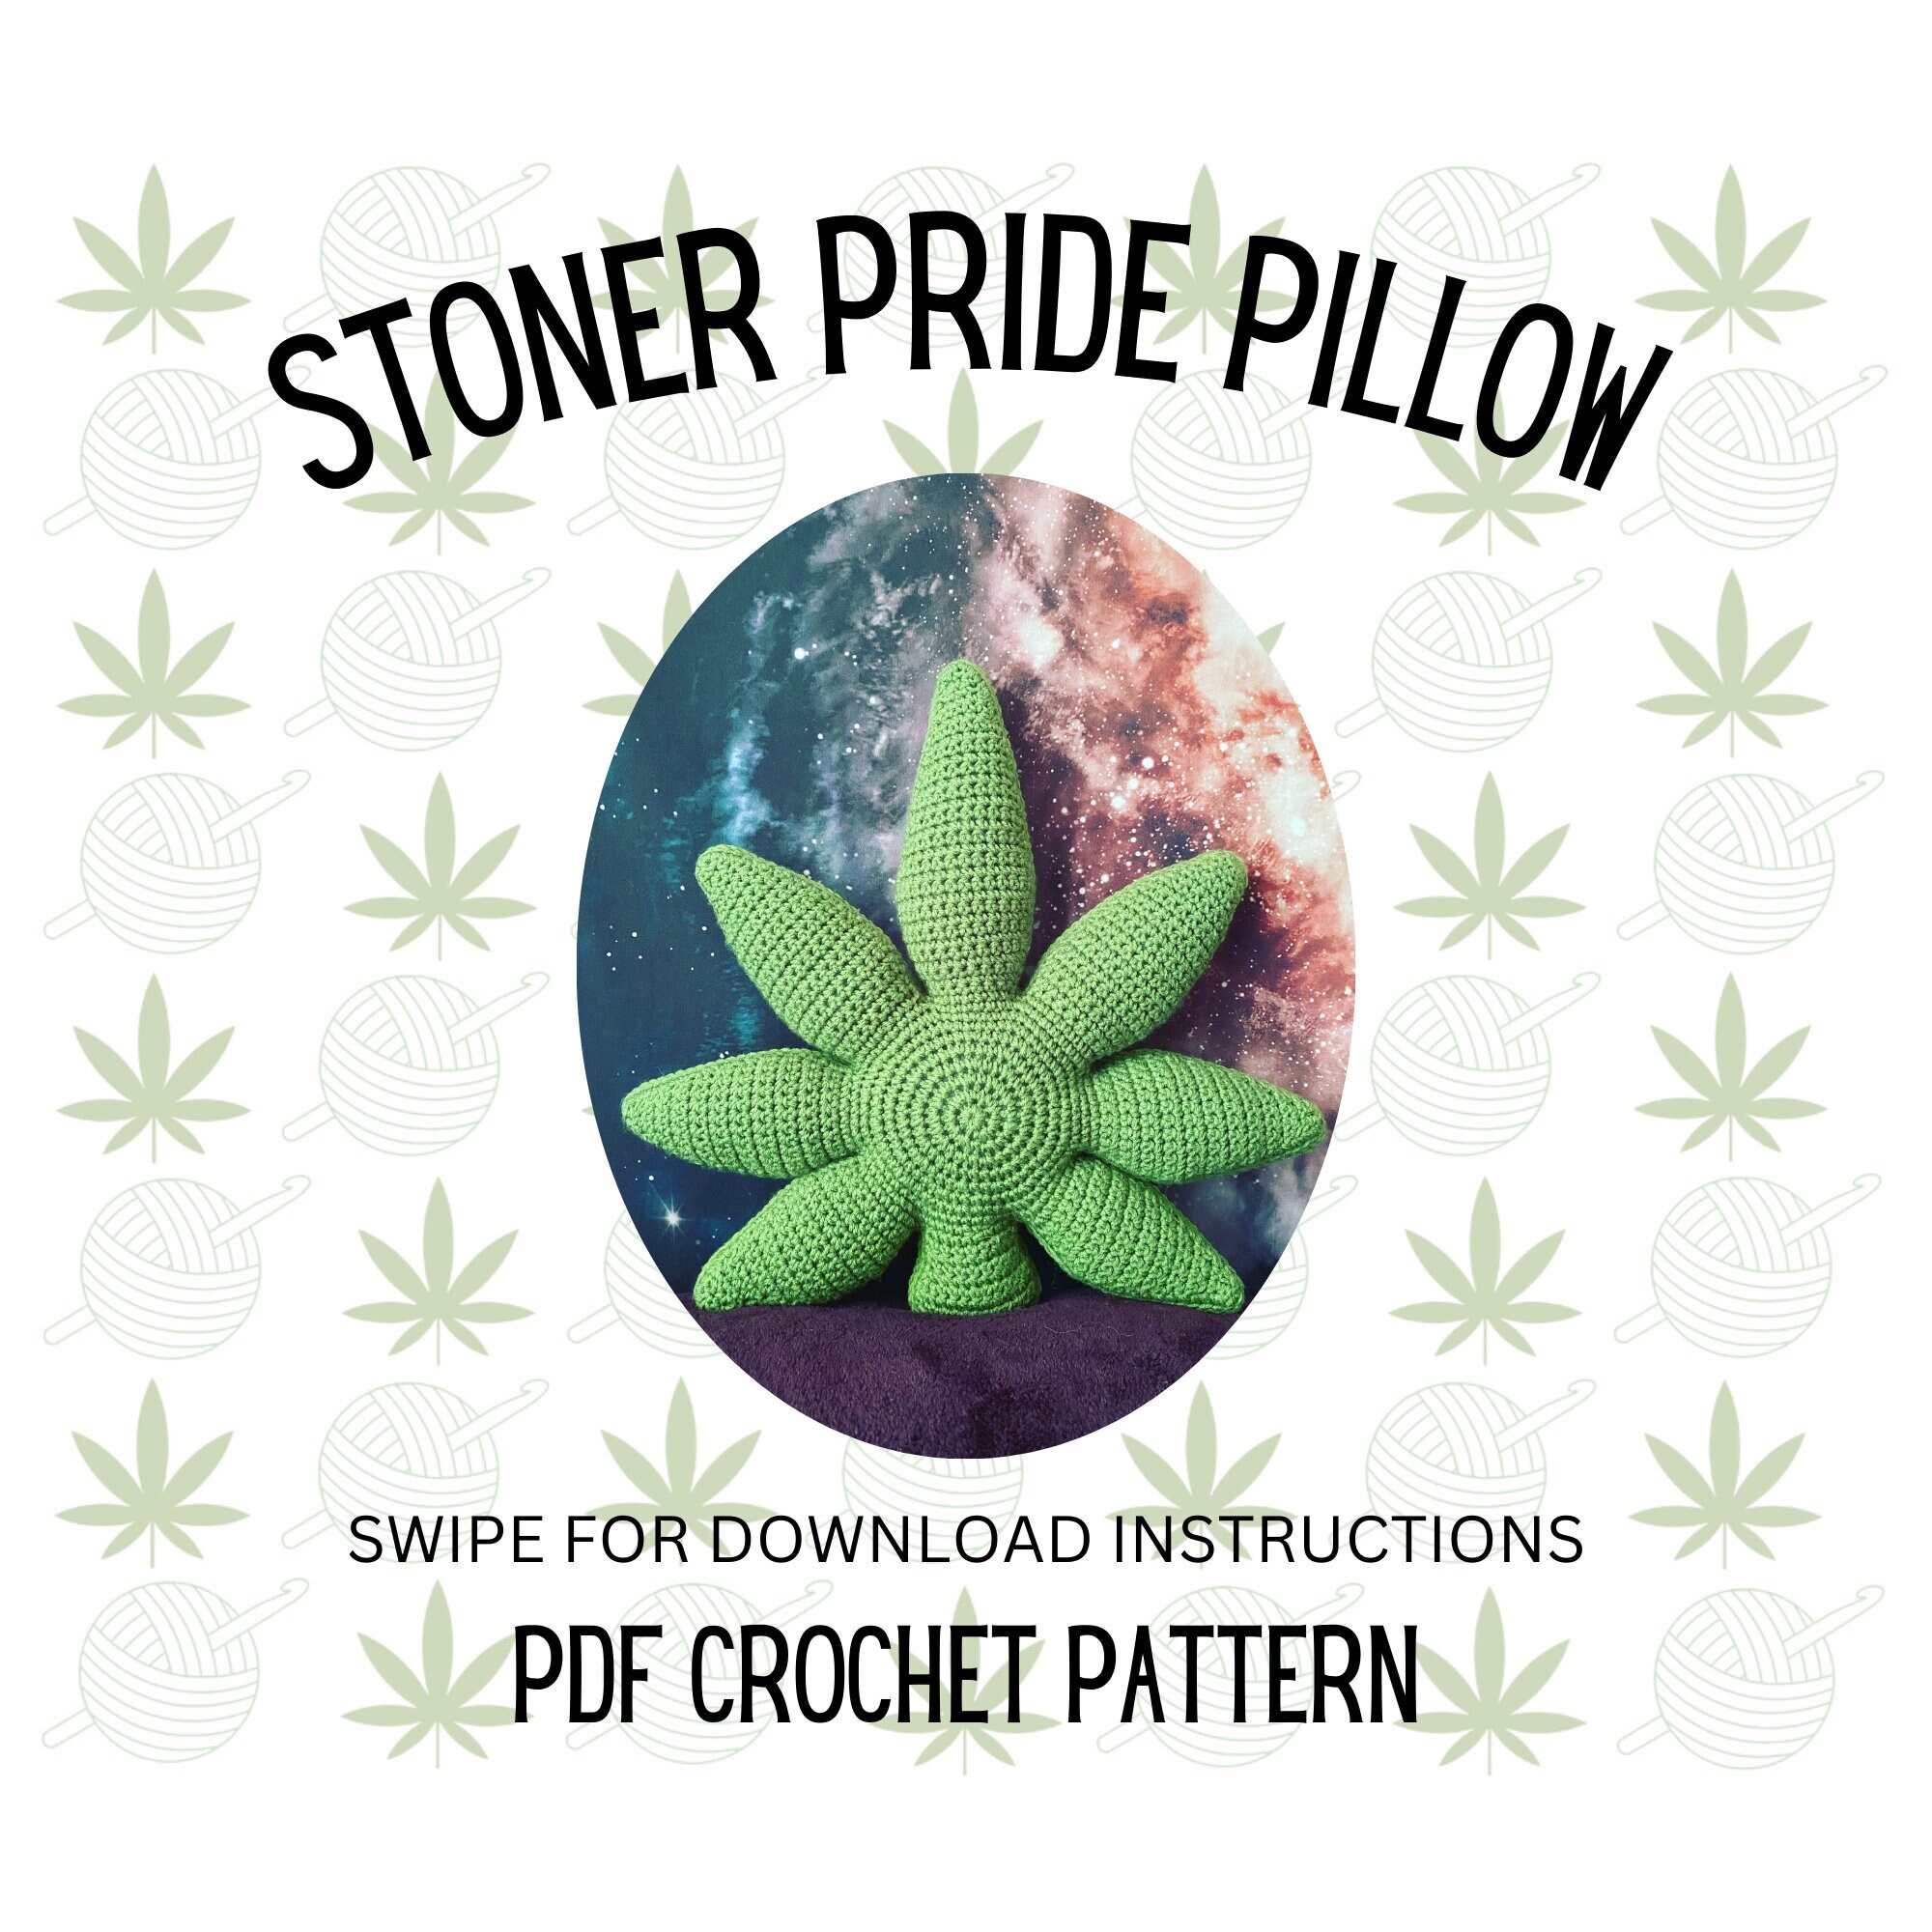 Embroidered Patch (Iron-On or Sew-On), Puff Puff Pass 420 Smoking, 3 x 1.5